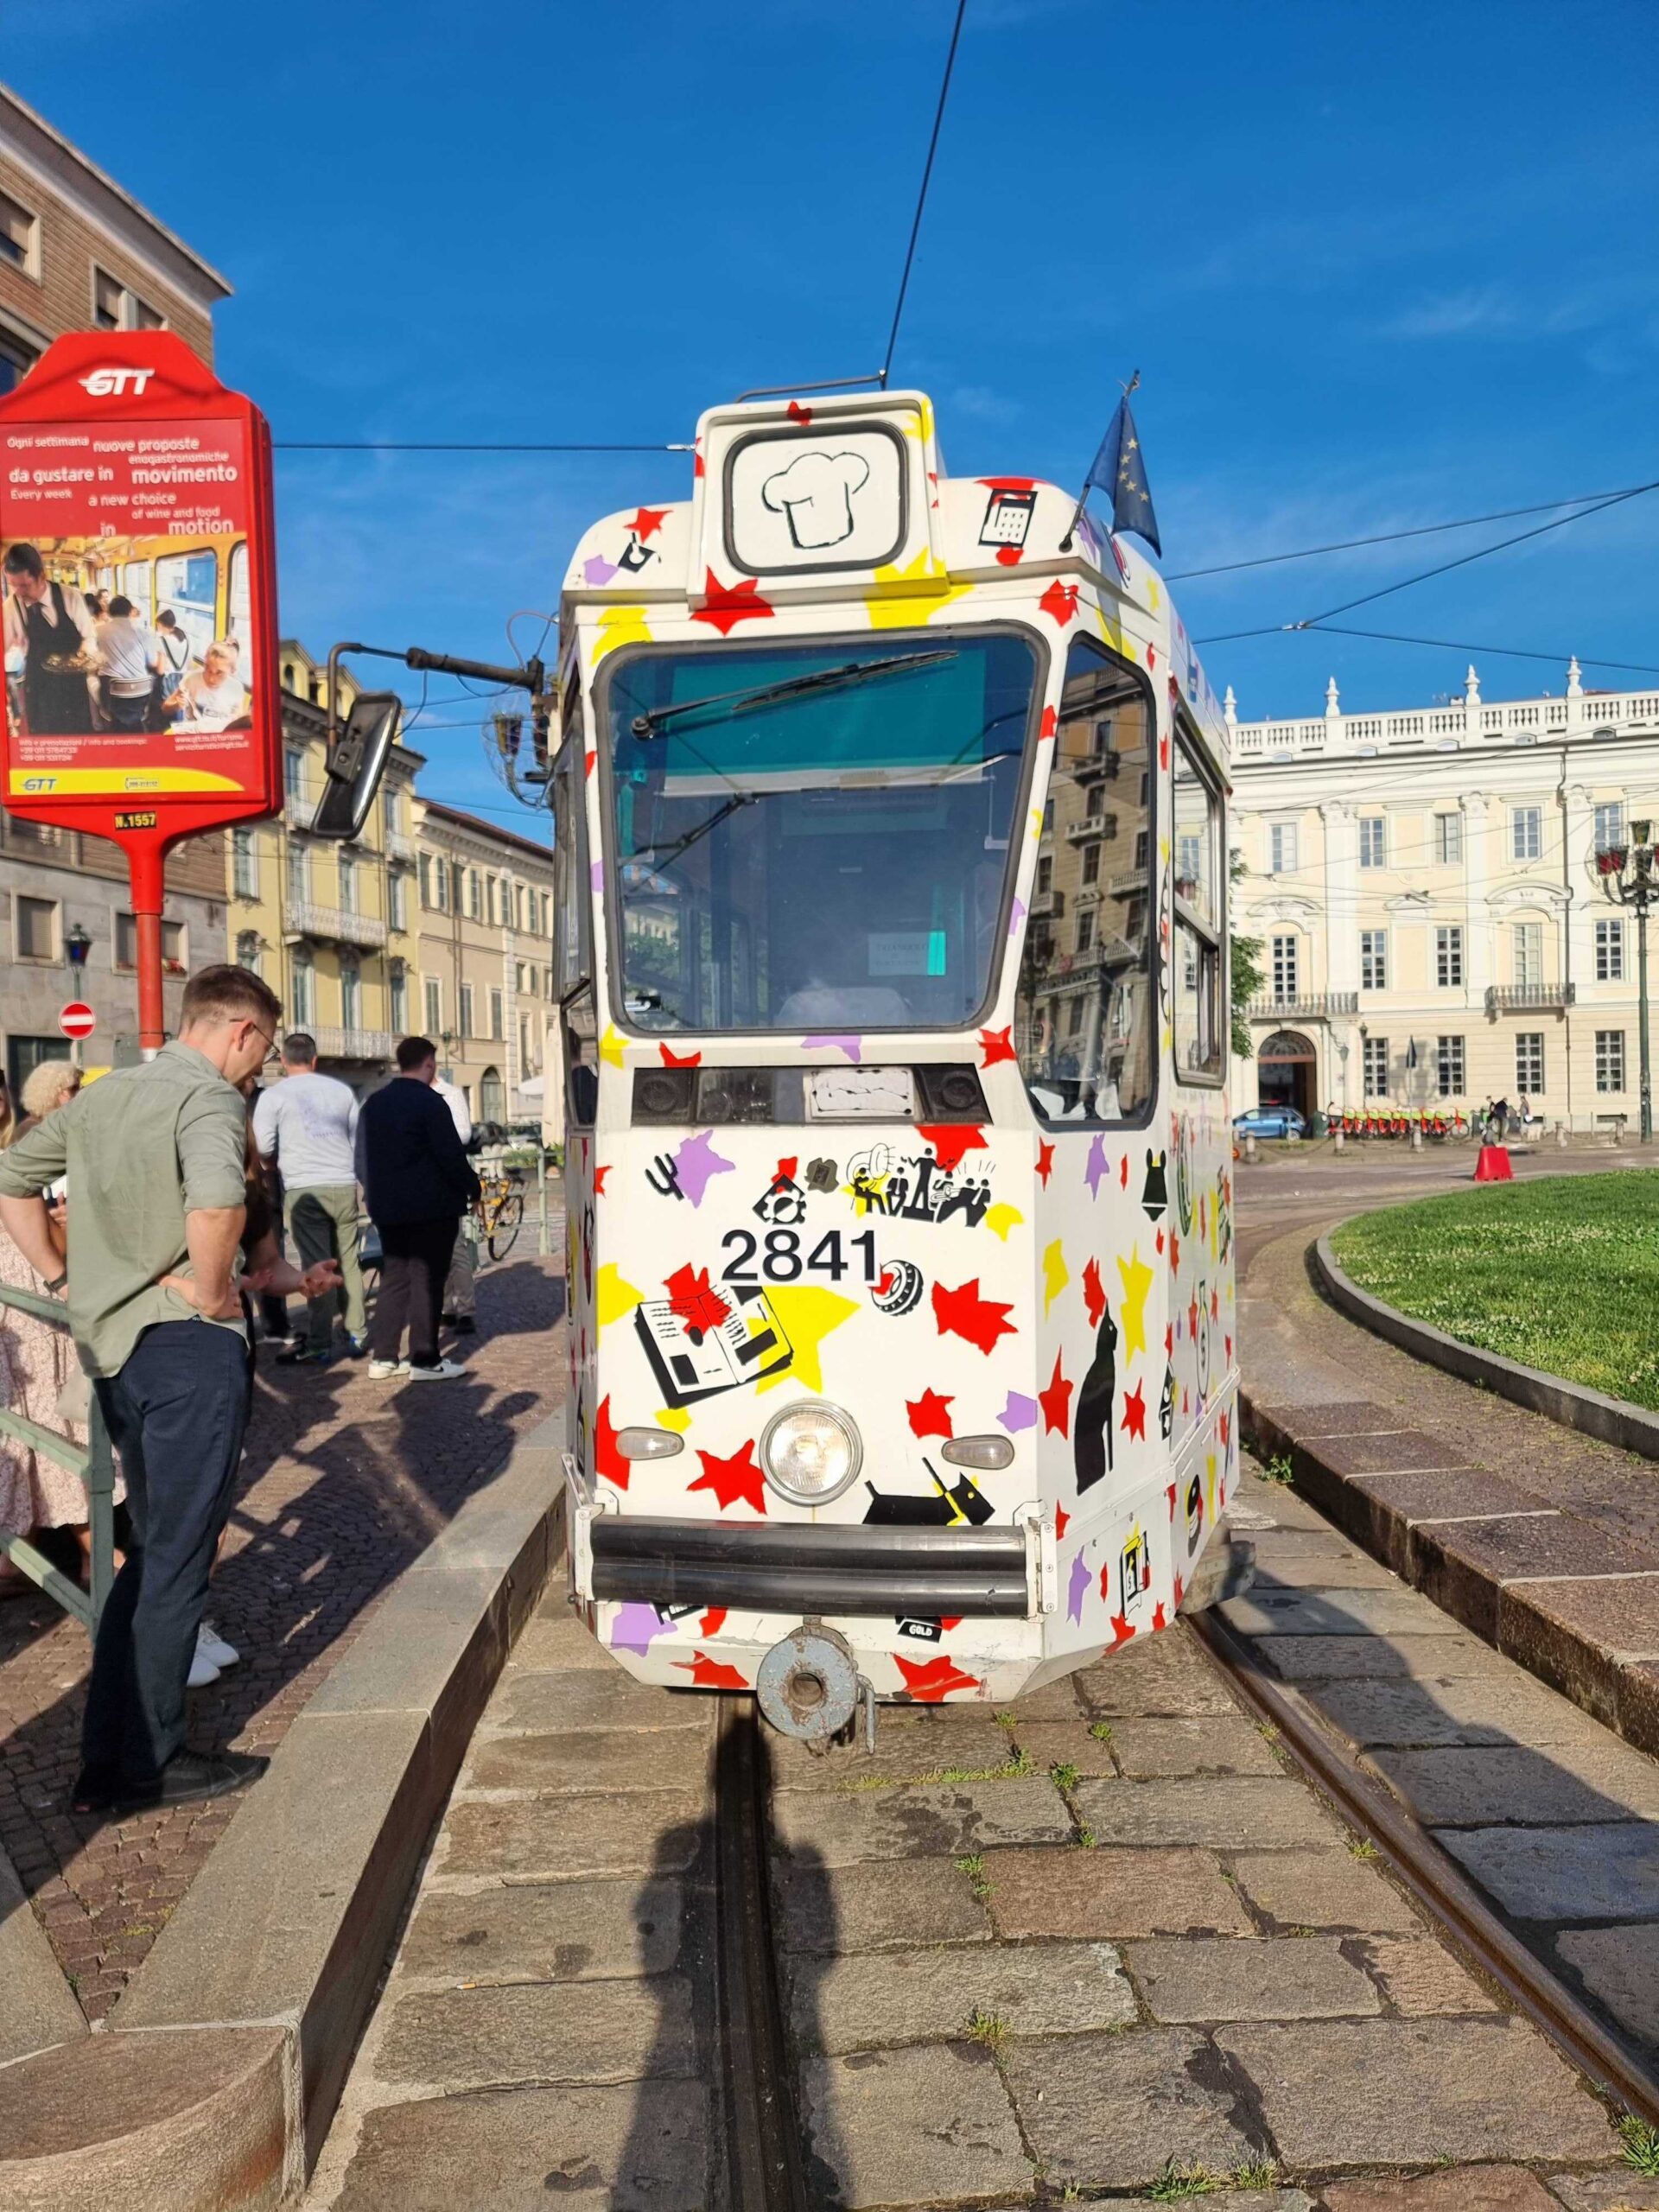 A specially decorated tram with red, yellow and purple stars.